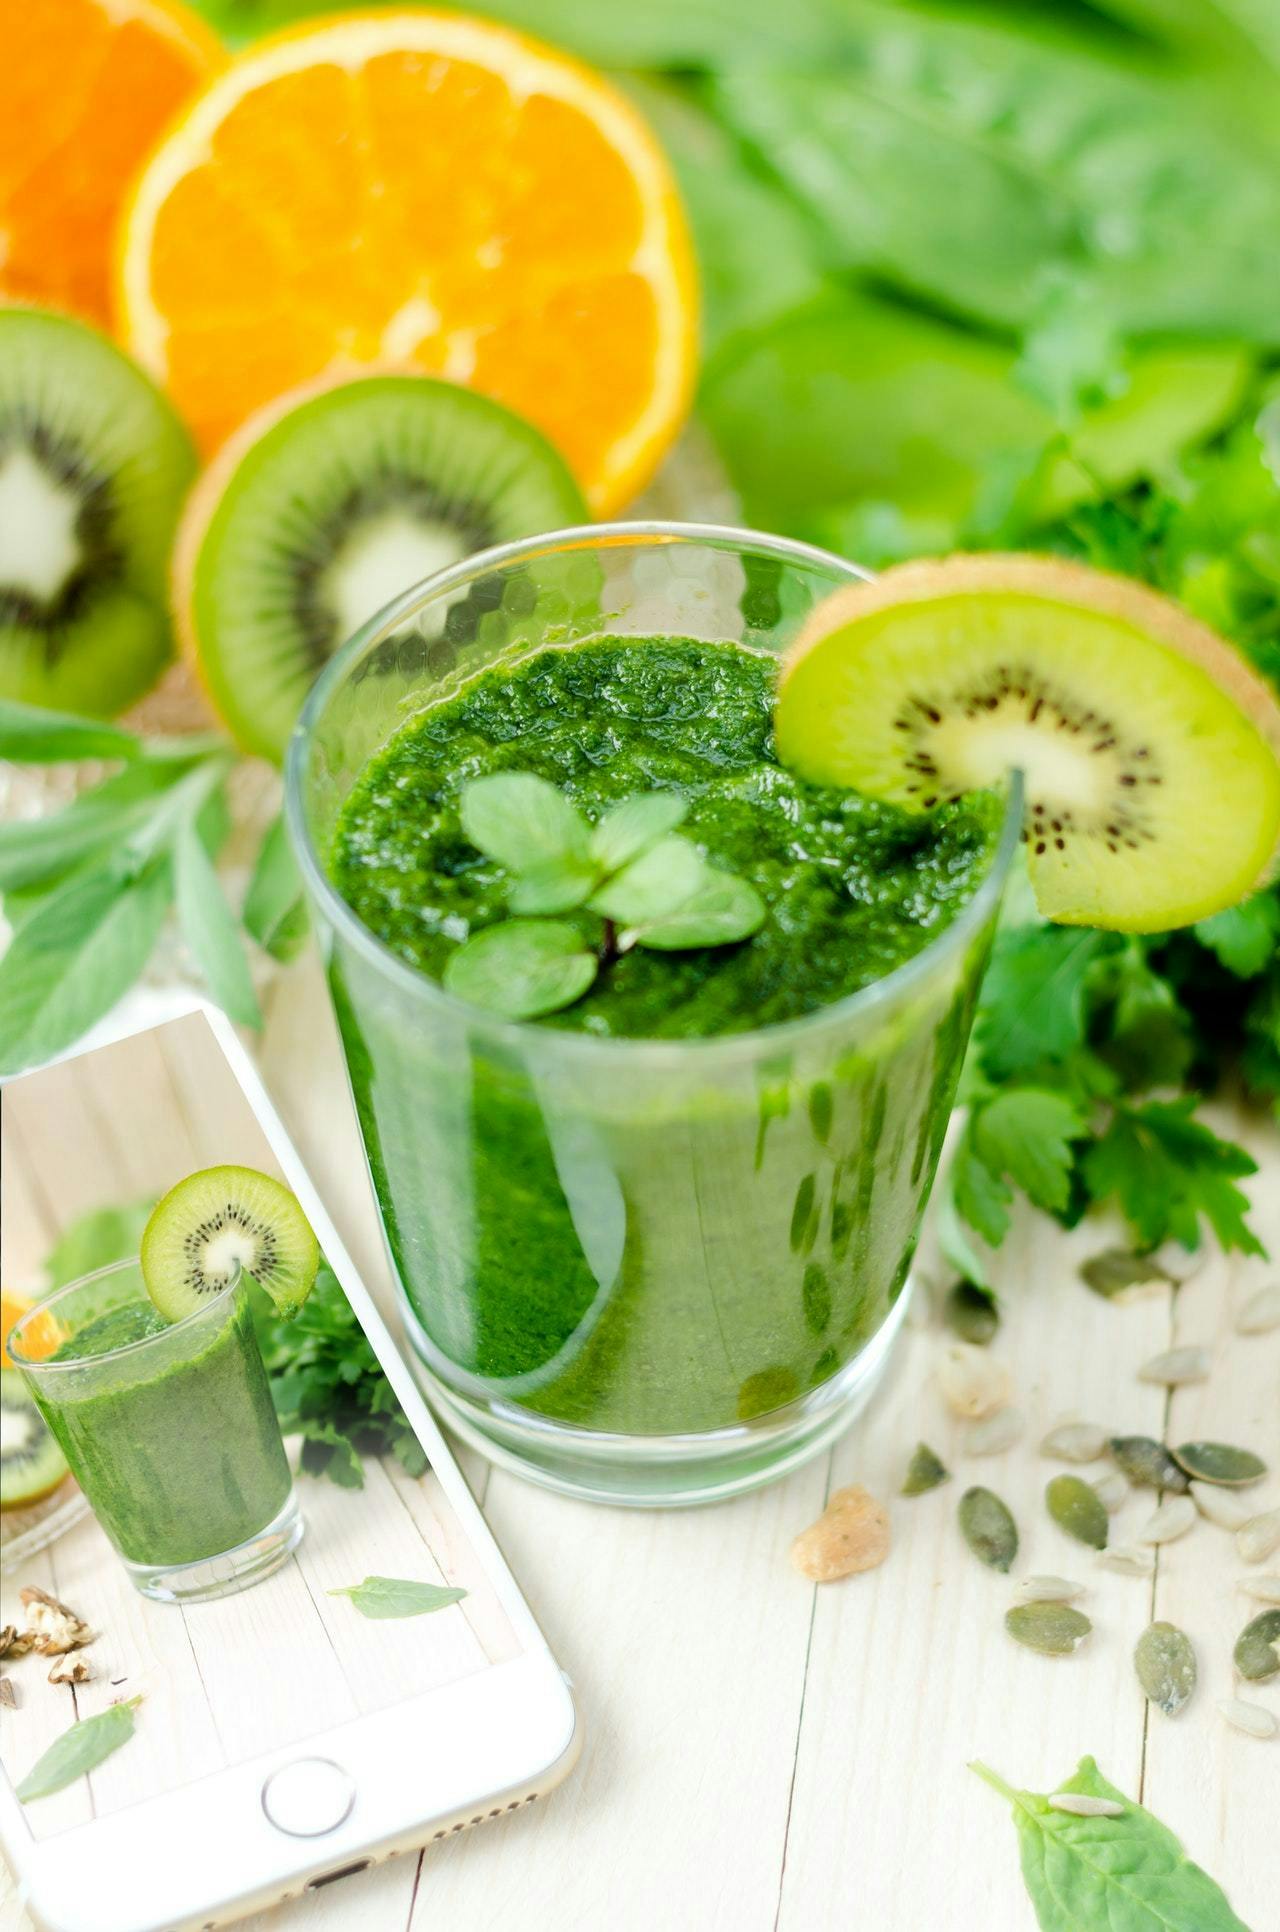 7 Simple Smoothie Recipes to Keep Your Immune System Strong